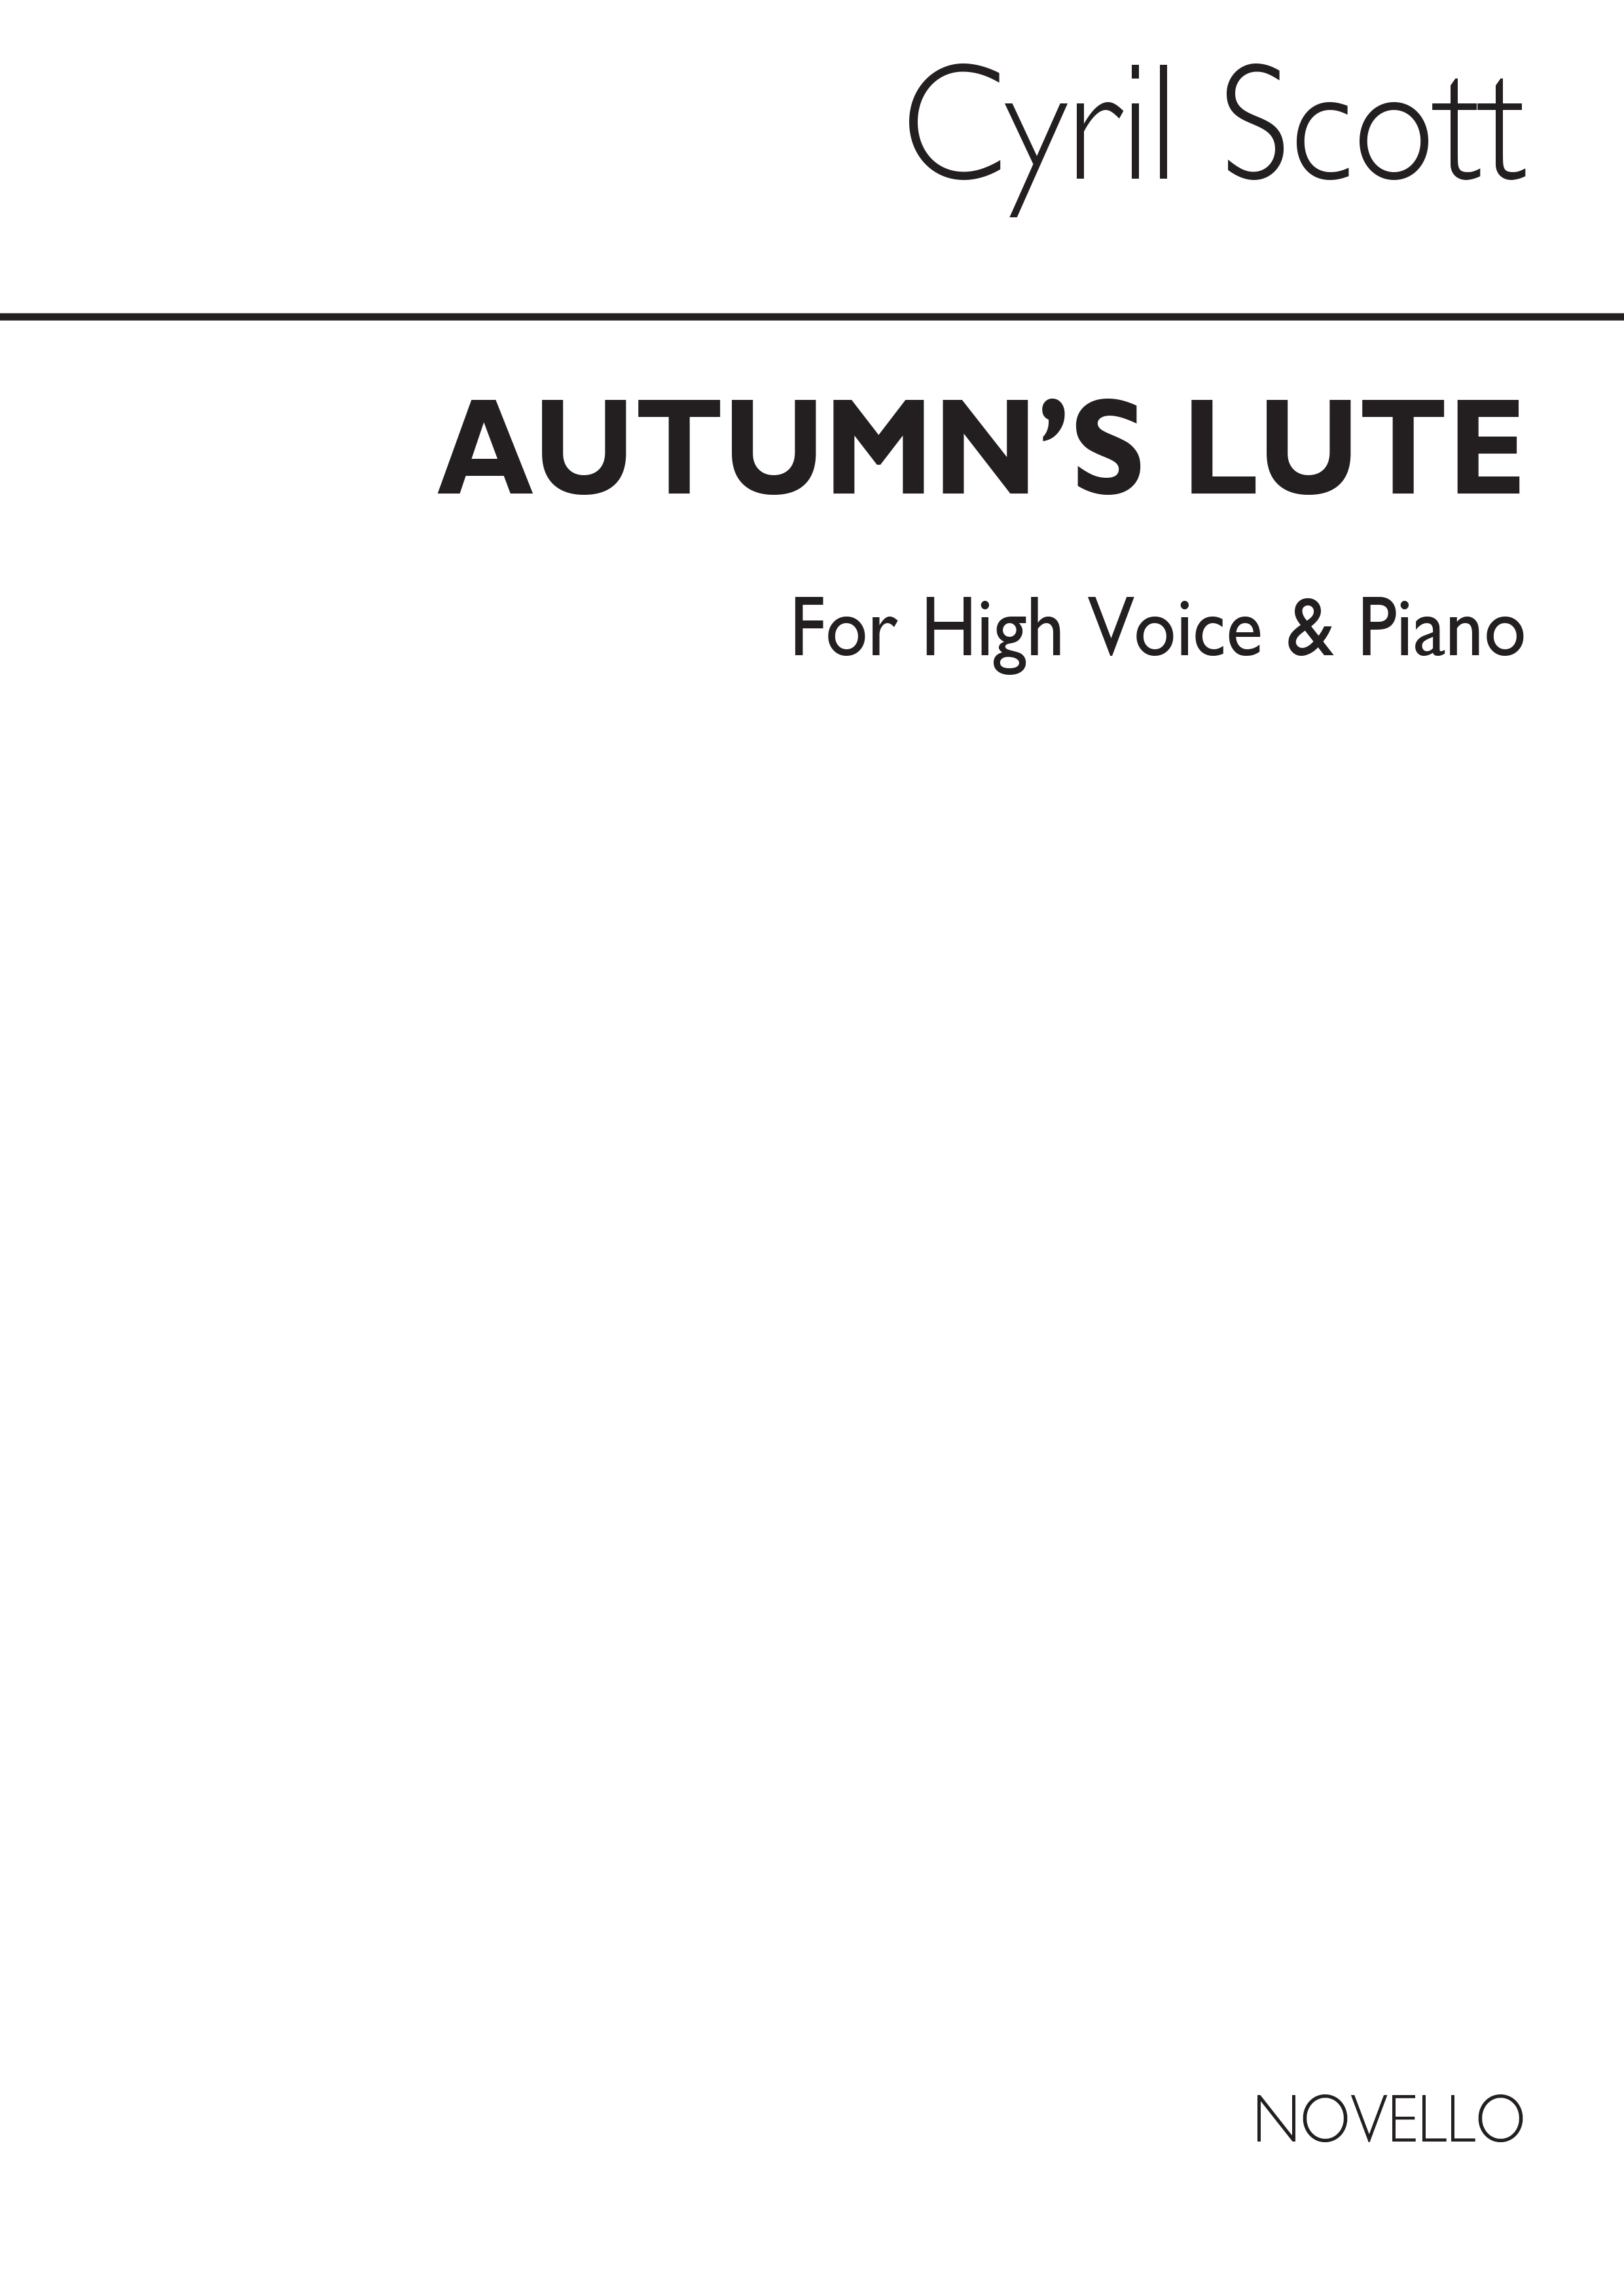 Cyril Scott: Autumn's Lute-high Voice/Piano